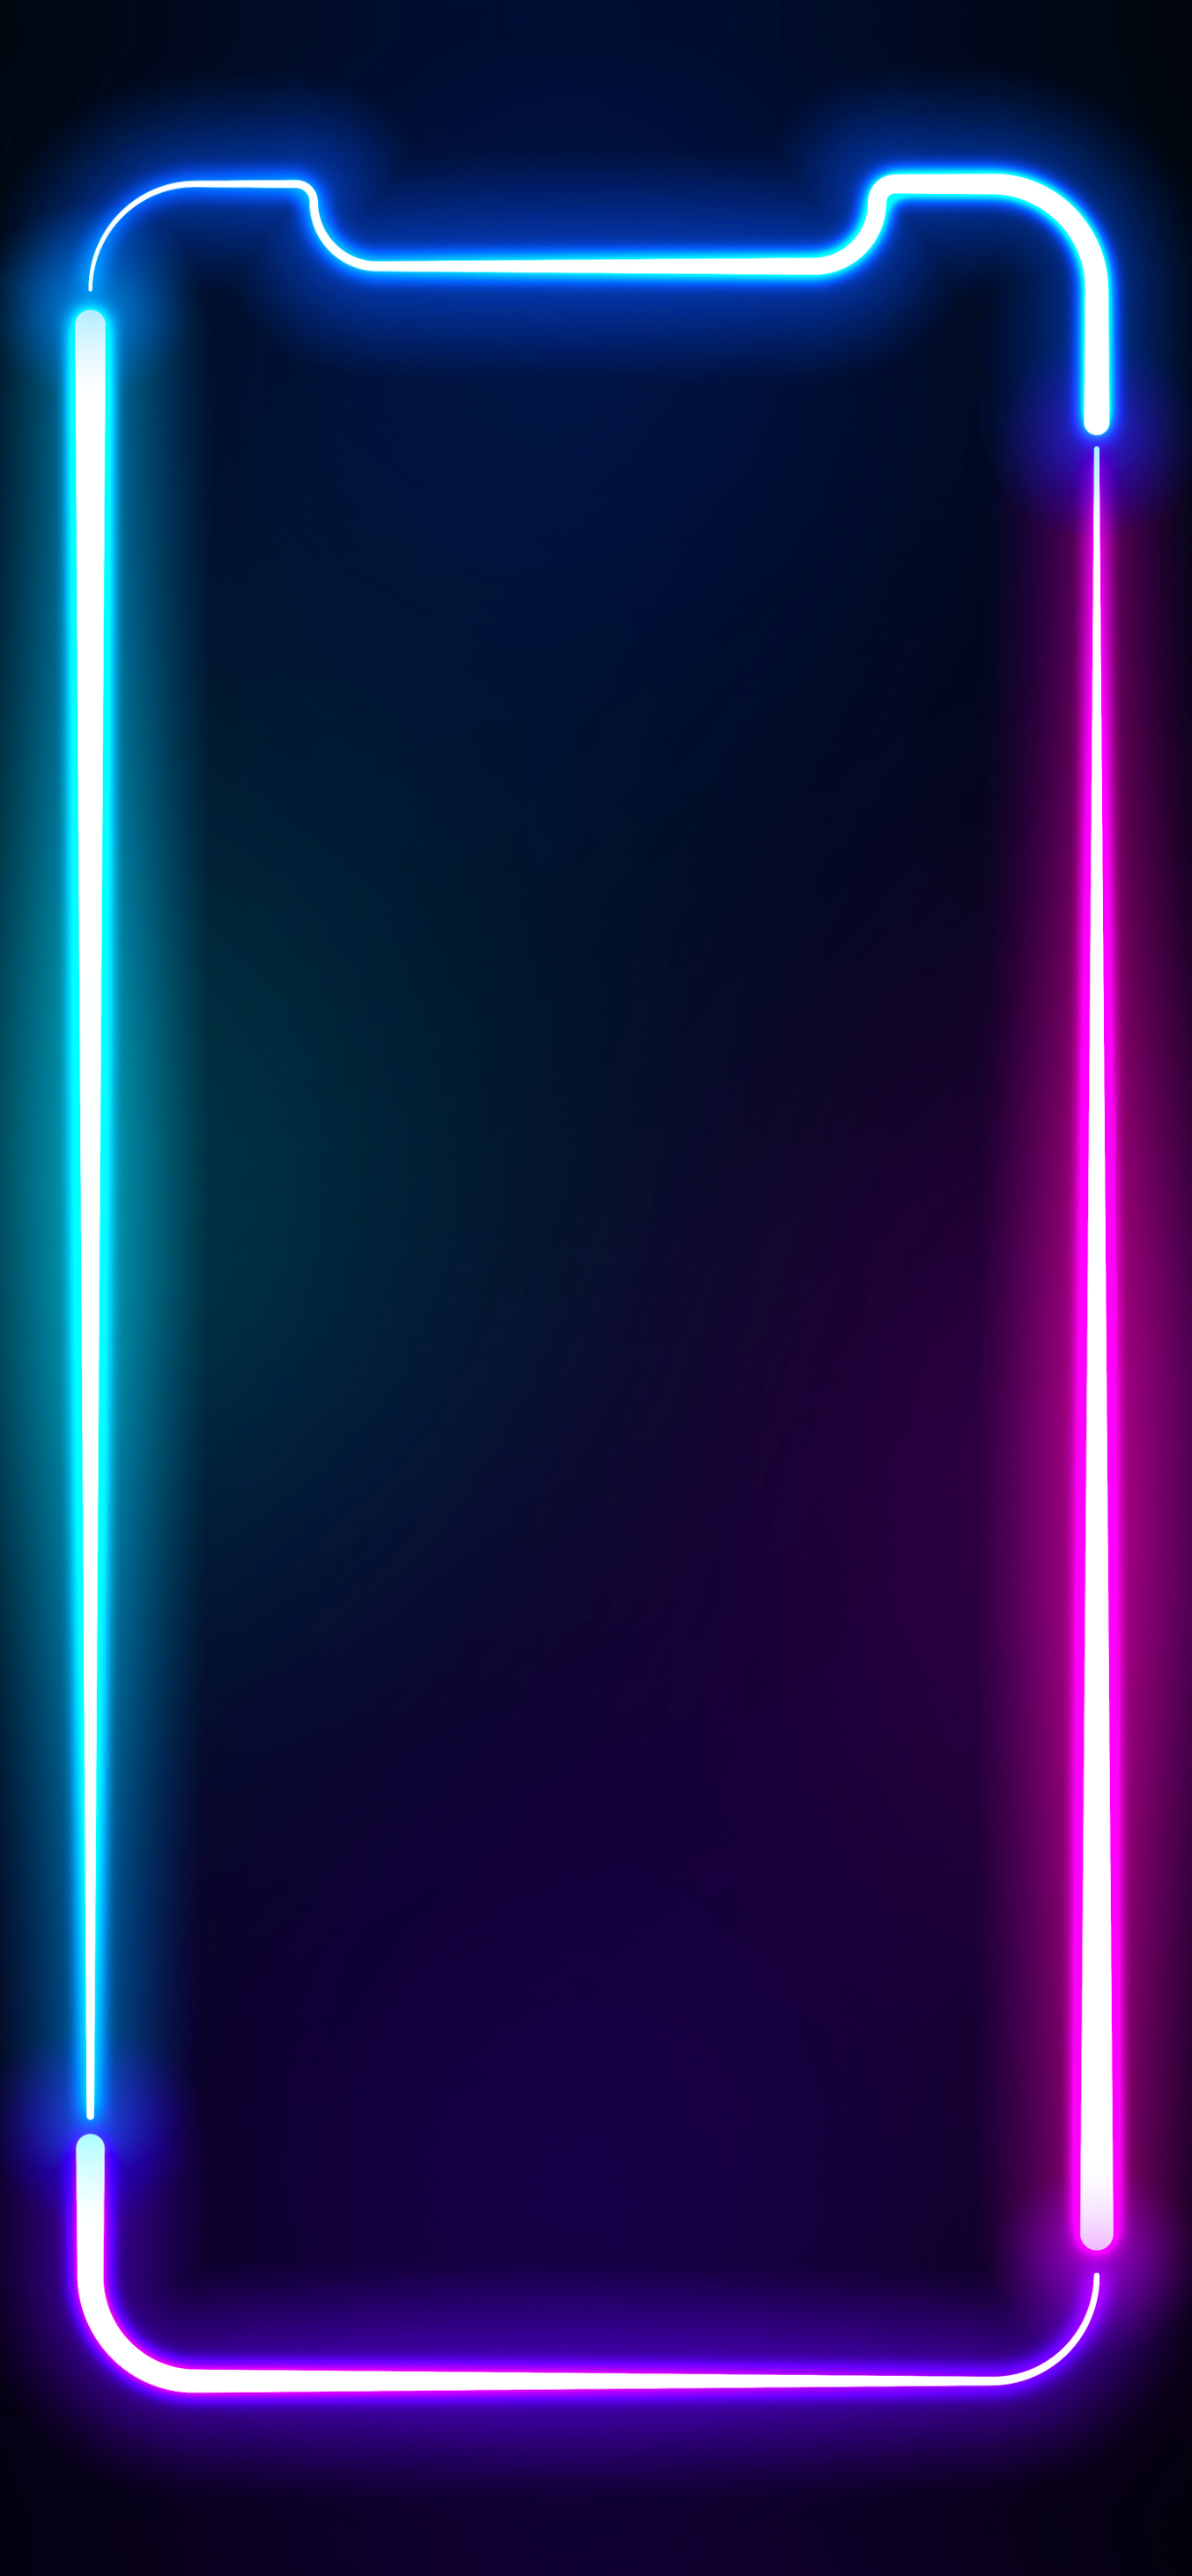 NEON Frame. Pixel Perfect Central. iPhone wallpaper blur, iPhone wallpaper glitter, Wallpaper iphone neon